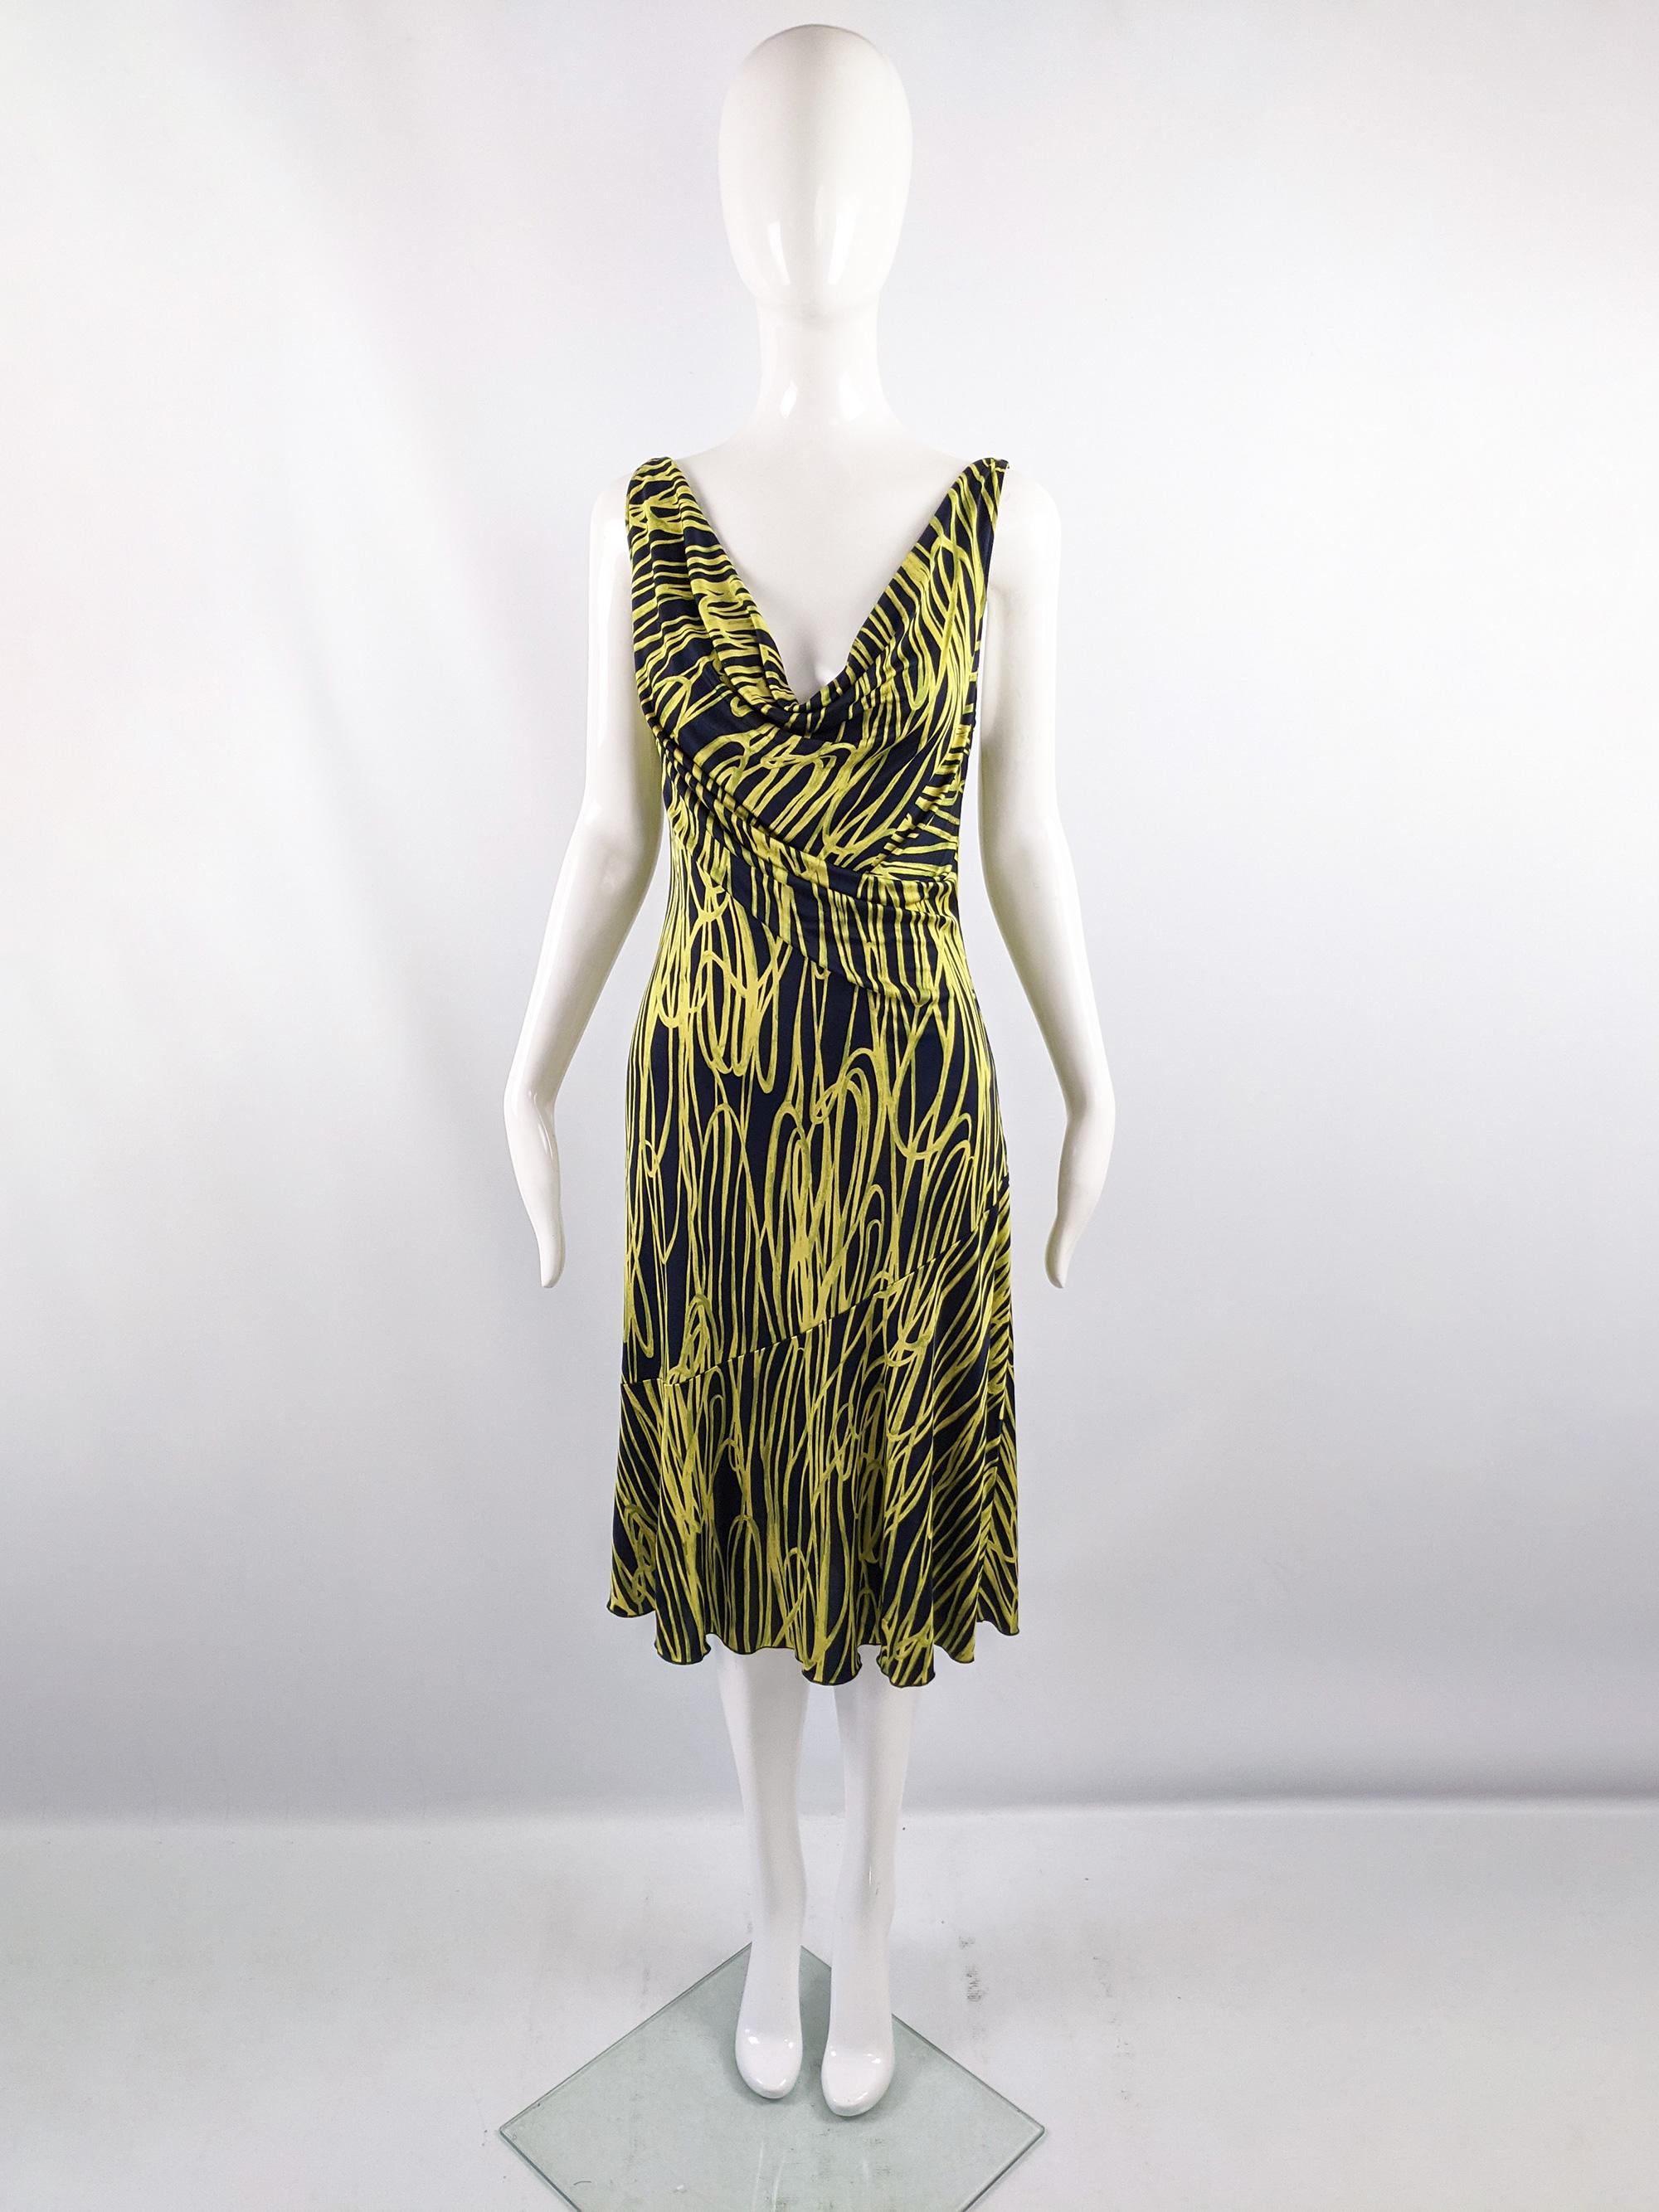 A sexy vintage sleeveless Moschino dress from the early 2000s. In a navy blue and yellow silk blend jersey which has amazing drape. It has a plunging neckline with a cowl effect, making it perfect for a party. 

Size: Marked vintage IT 46 but